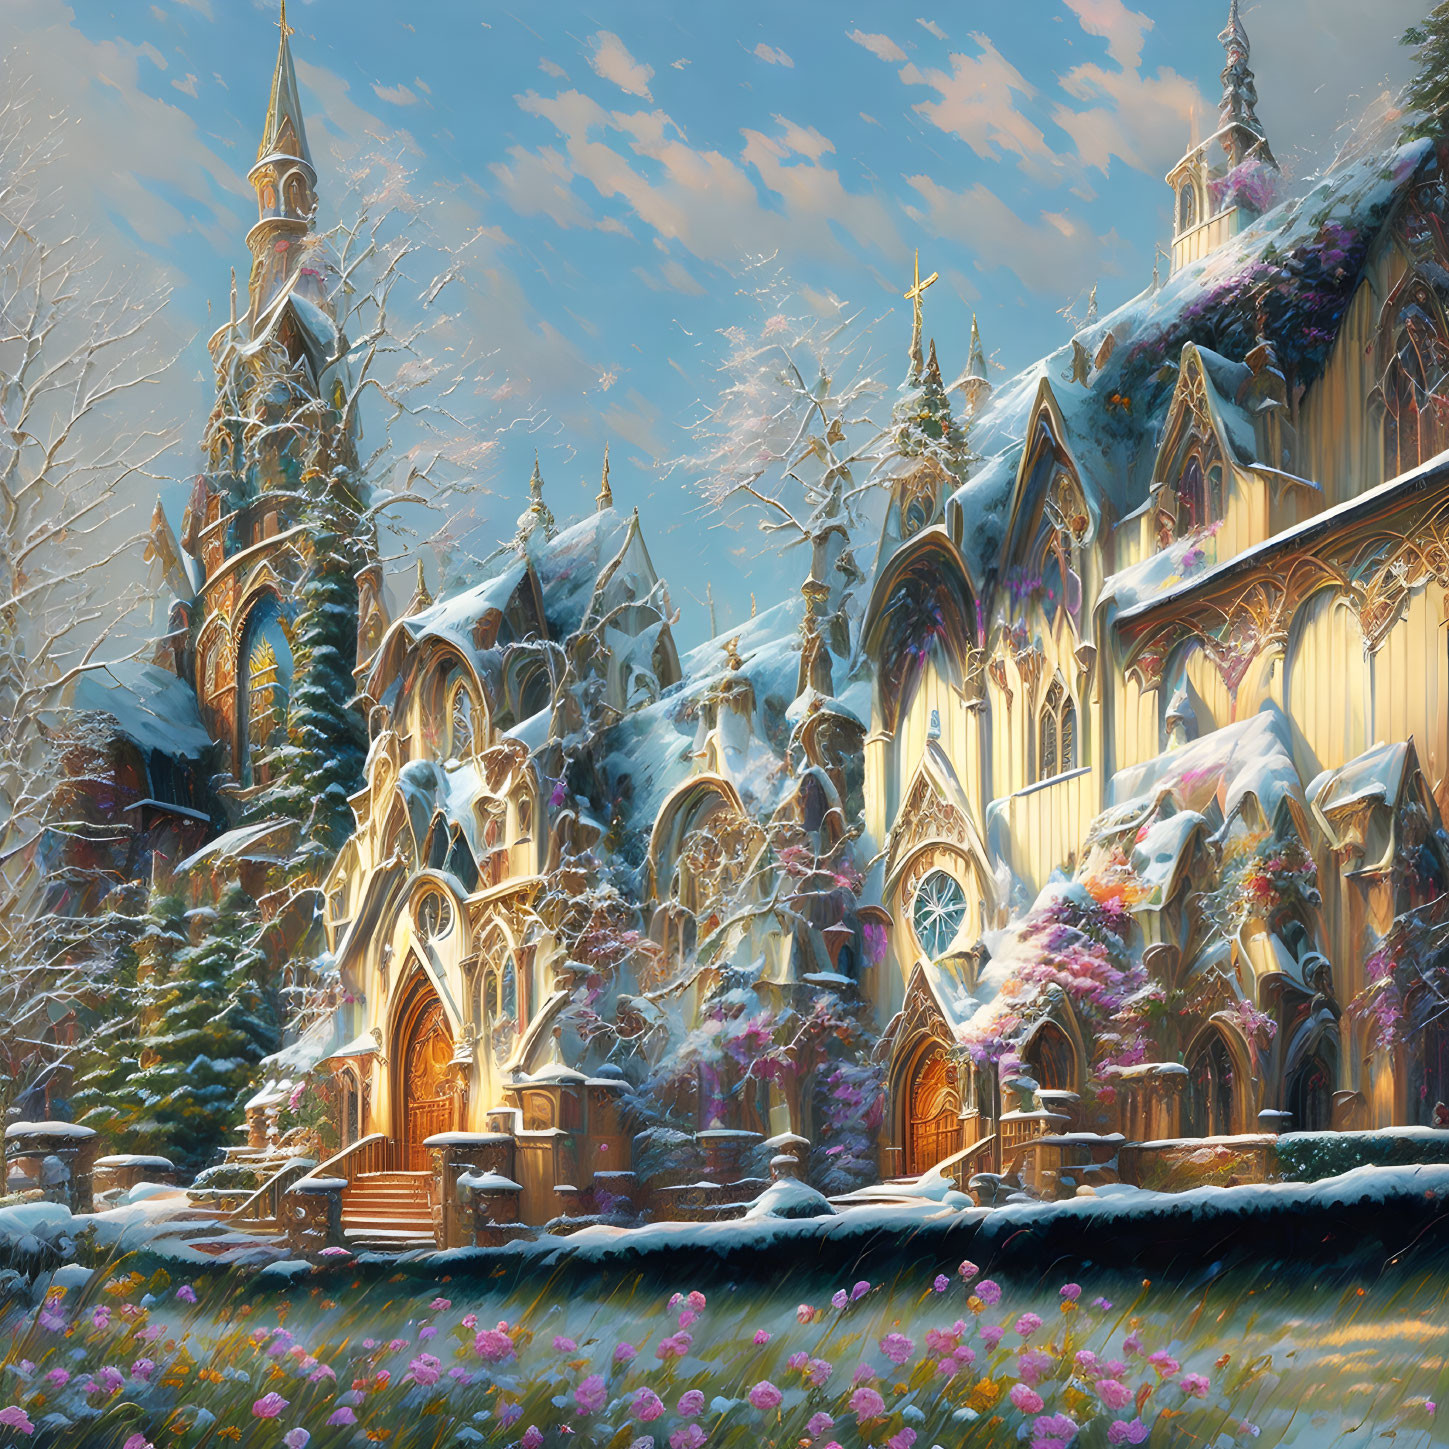 Snow-covered castle with winter flowers under clear sky